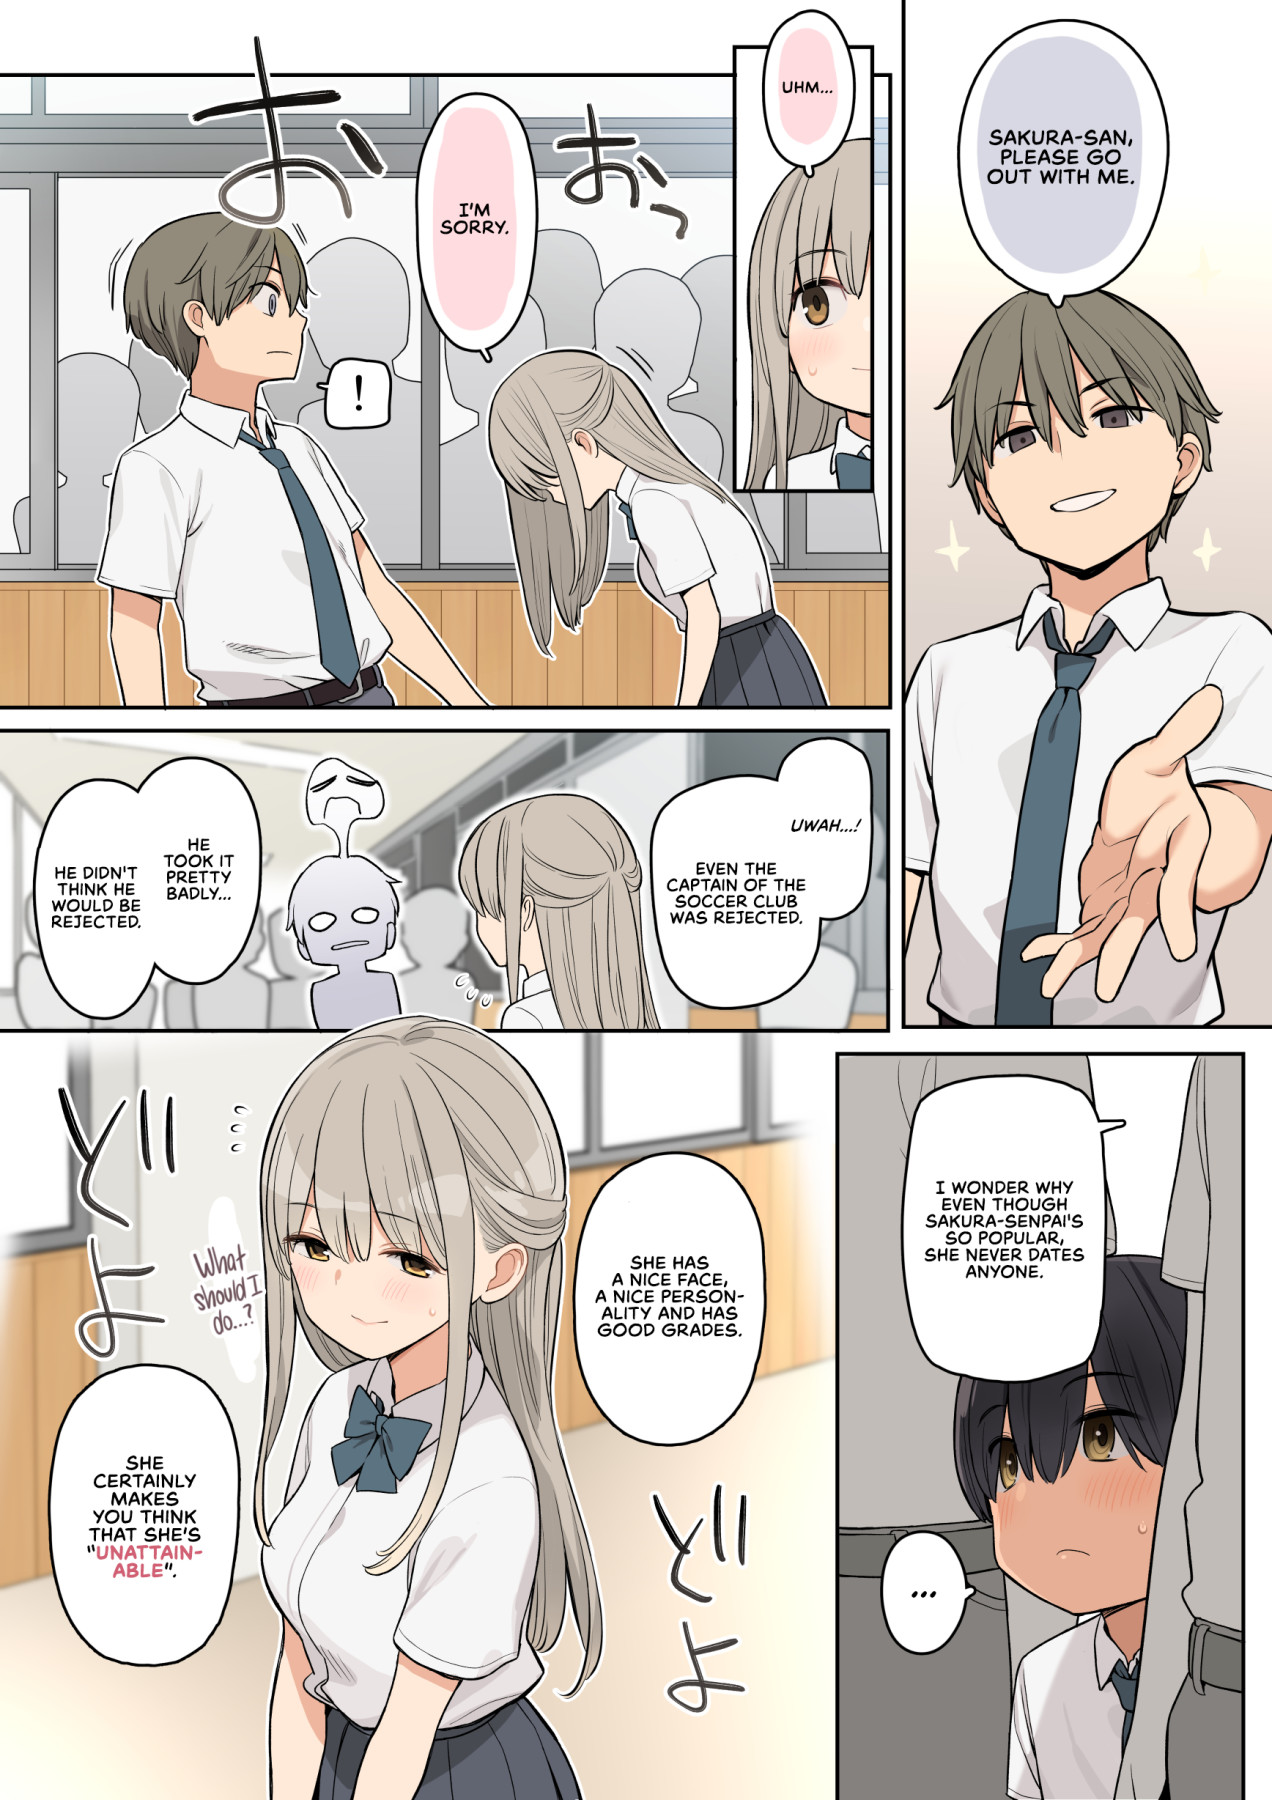 Hentai Manga Comic-The Story of How I, a Person Who Doesn't Stand Out Got Into a Relationship With The Senpai Who's Way Out of My League-Read-2